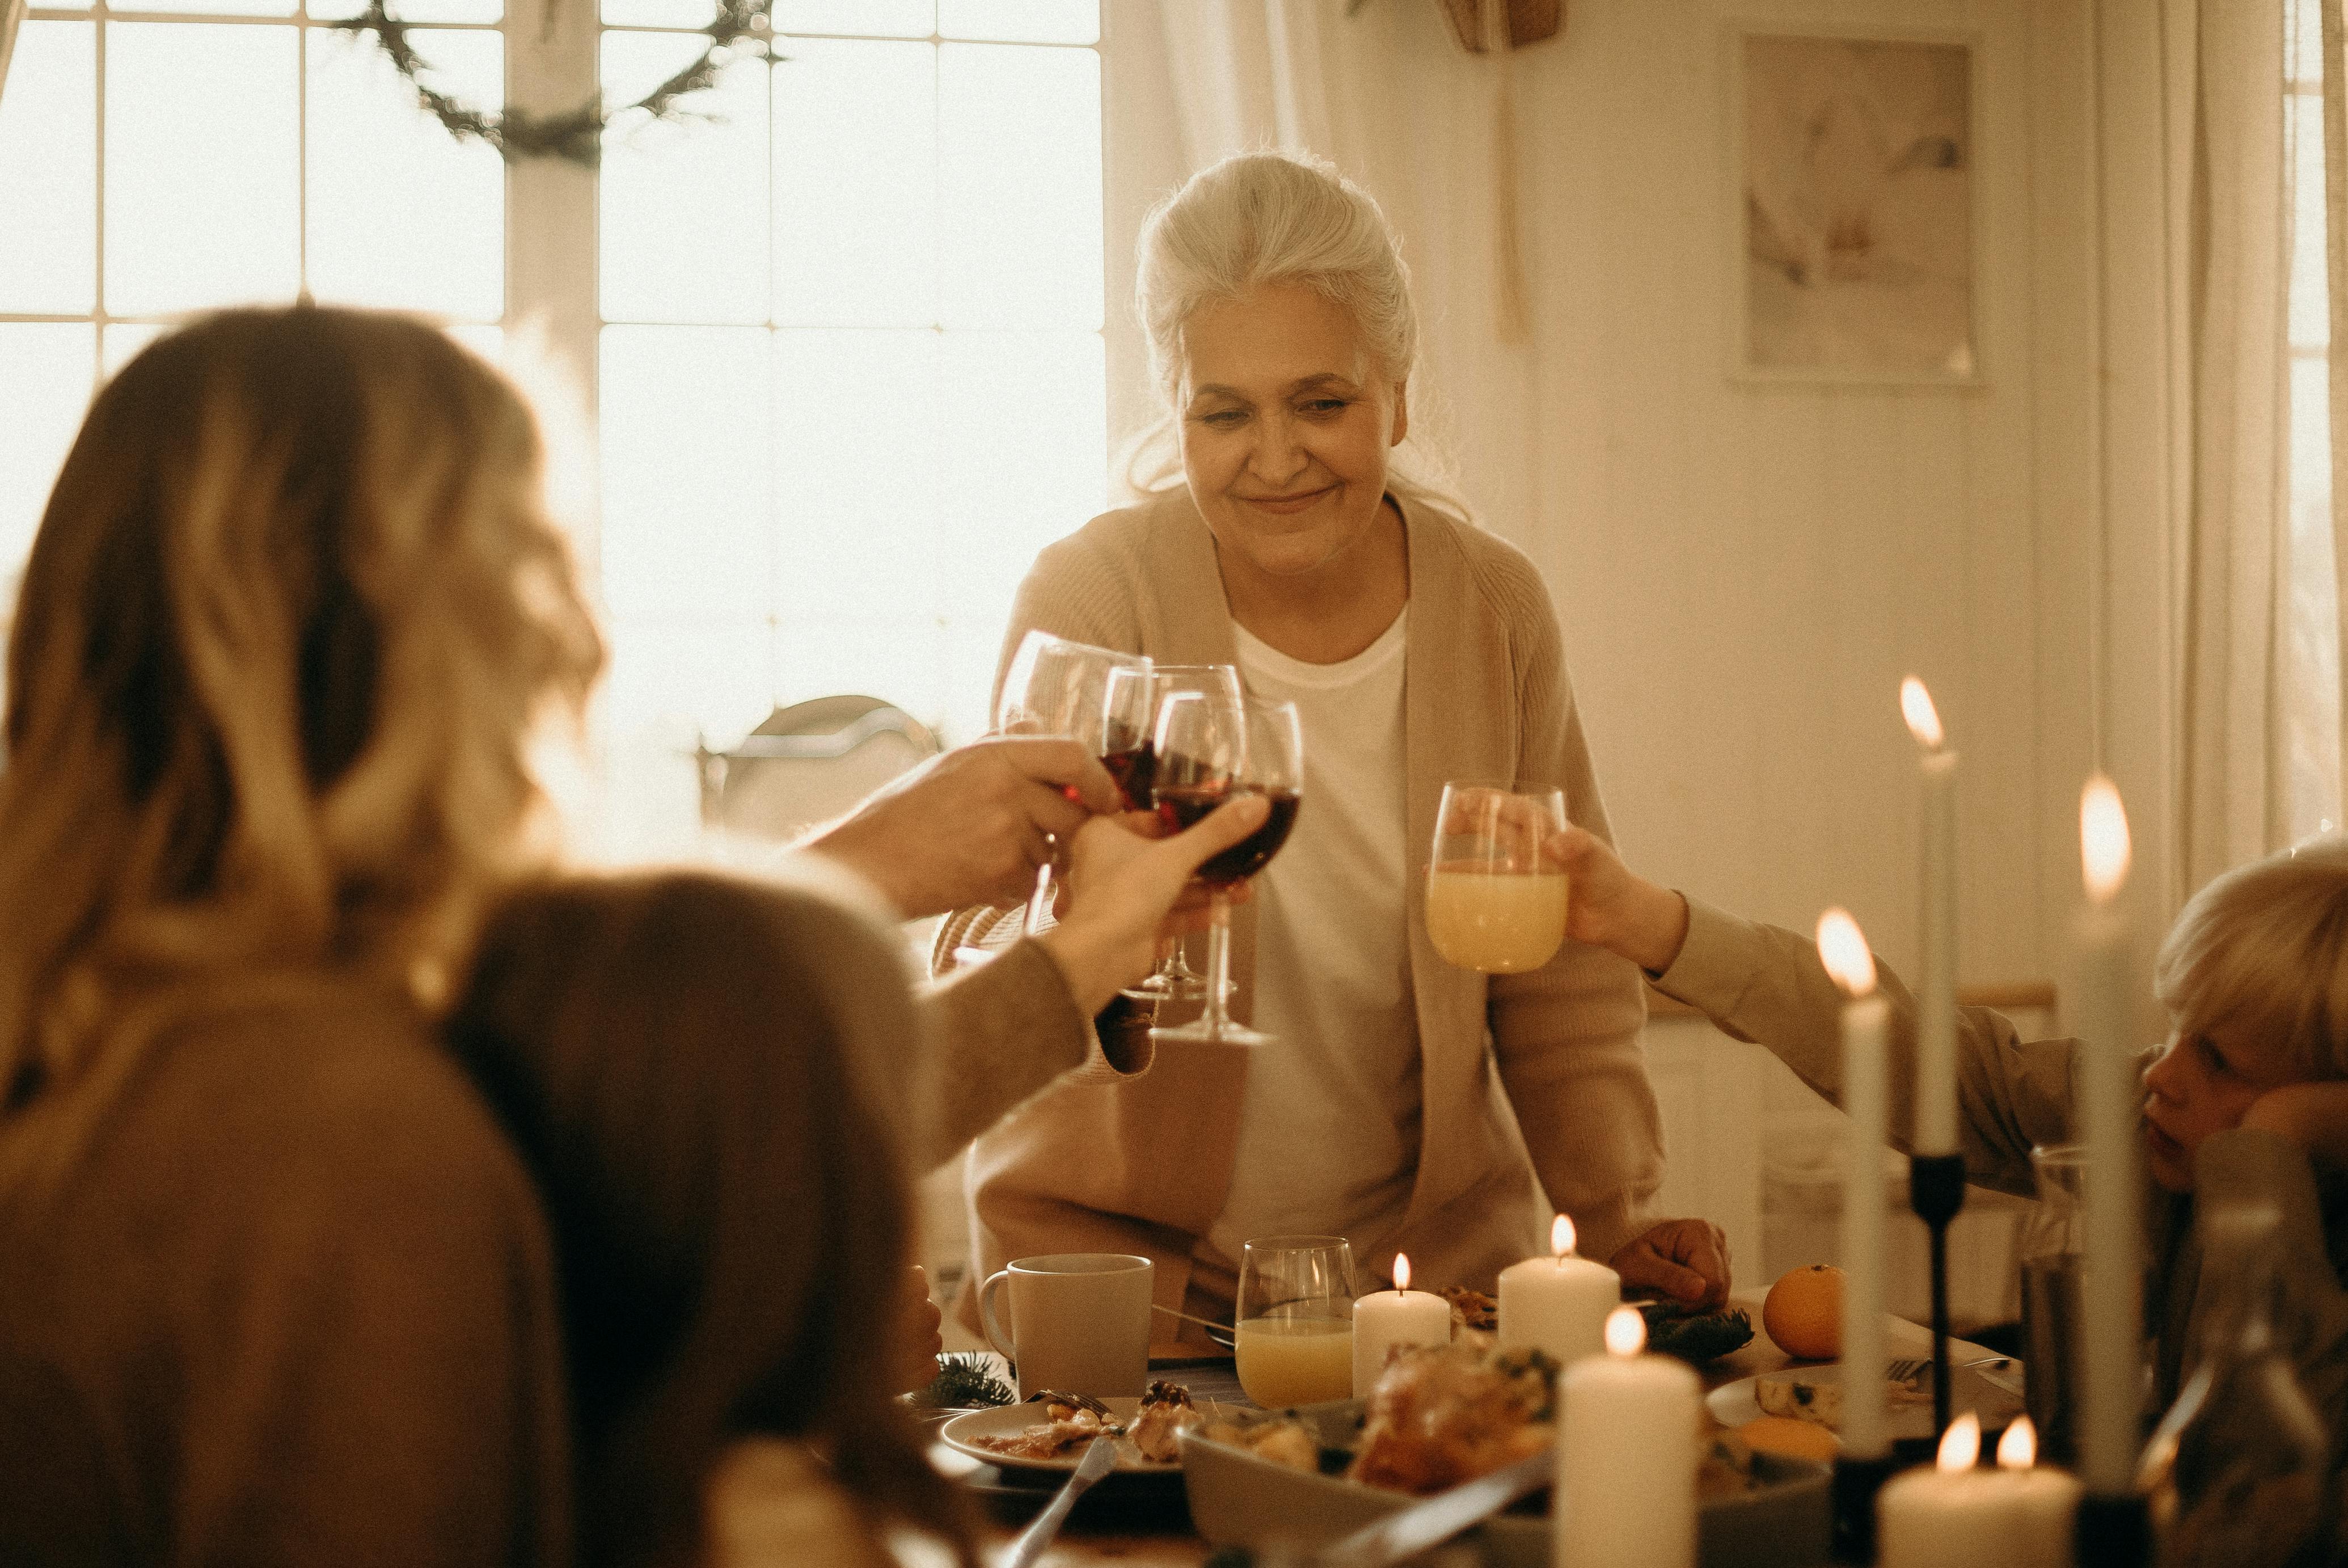 The family dinner with heartfelt conversations and renewed bonds | Source: Pexels